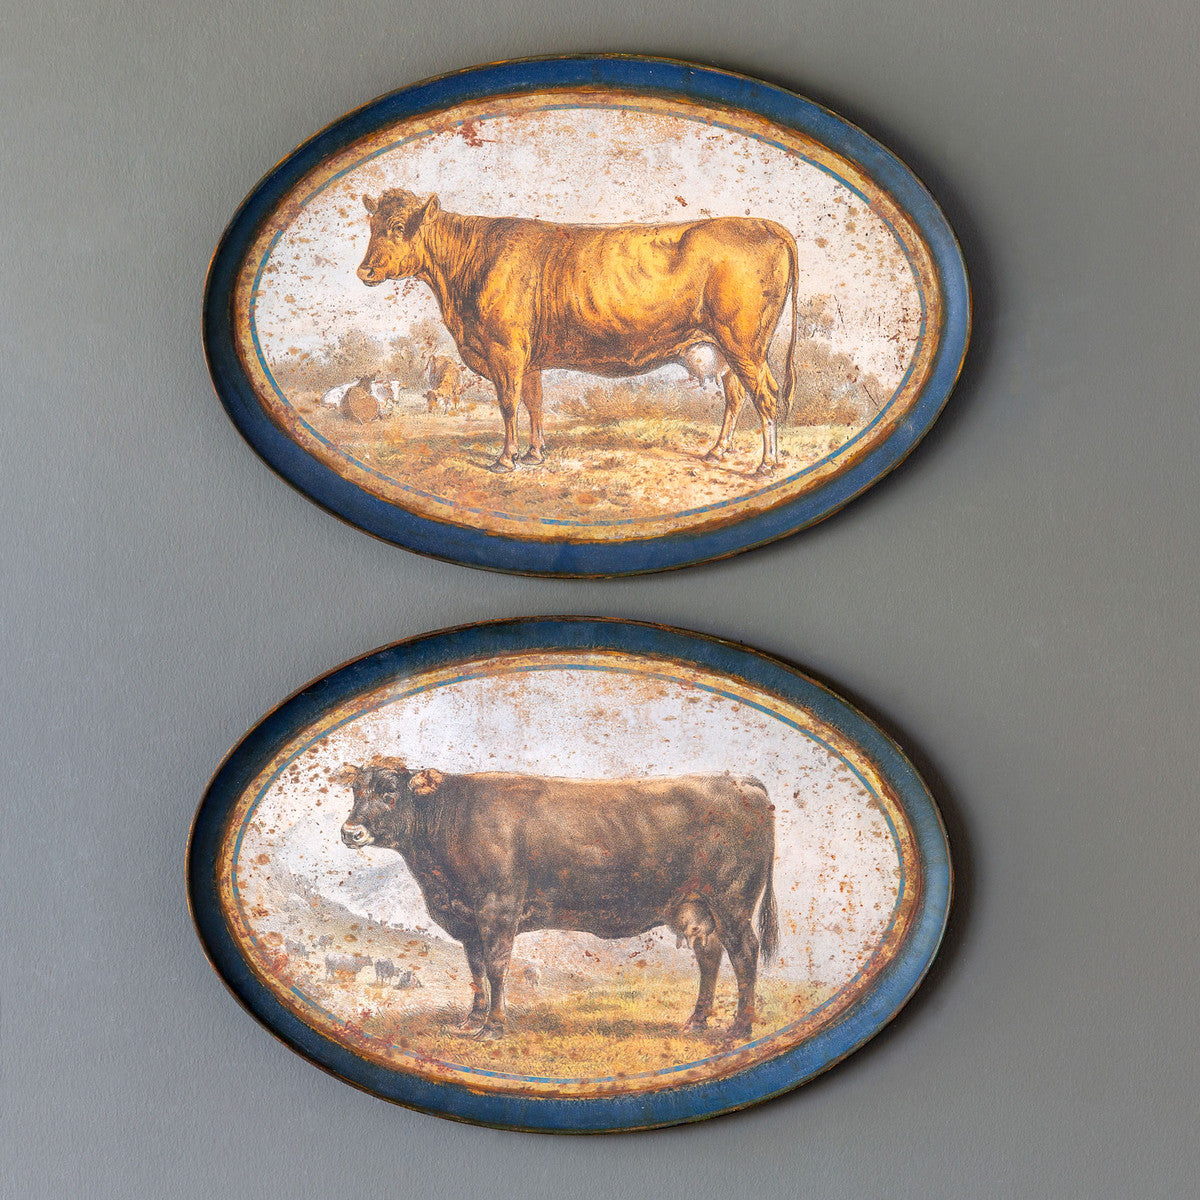 Aged Brown Cows Decorative Hanging Trays